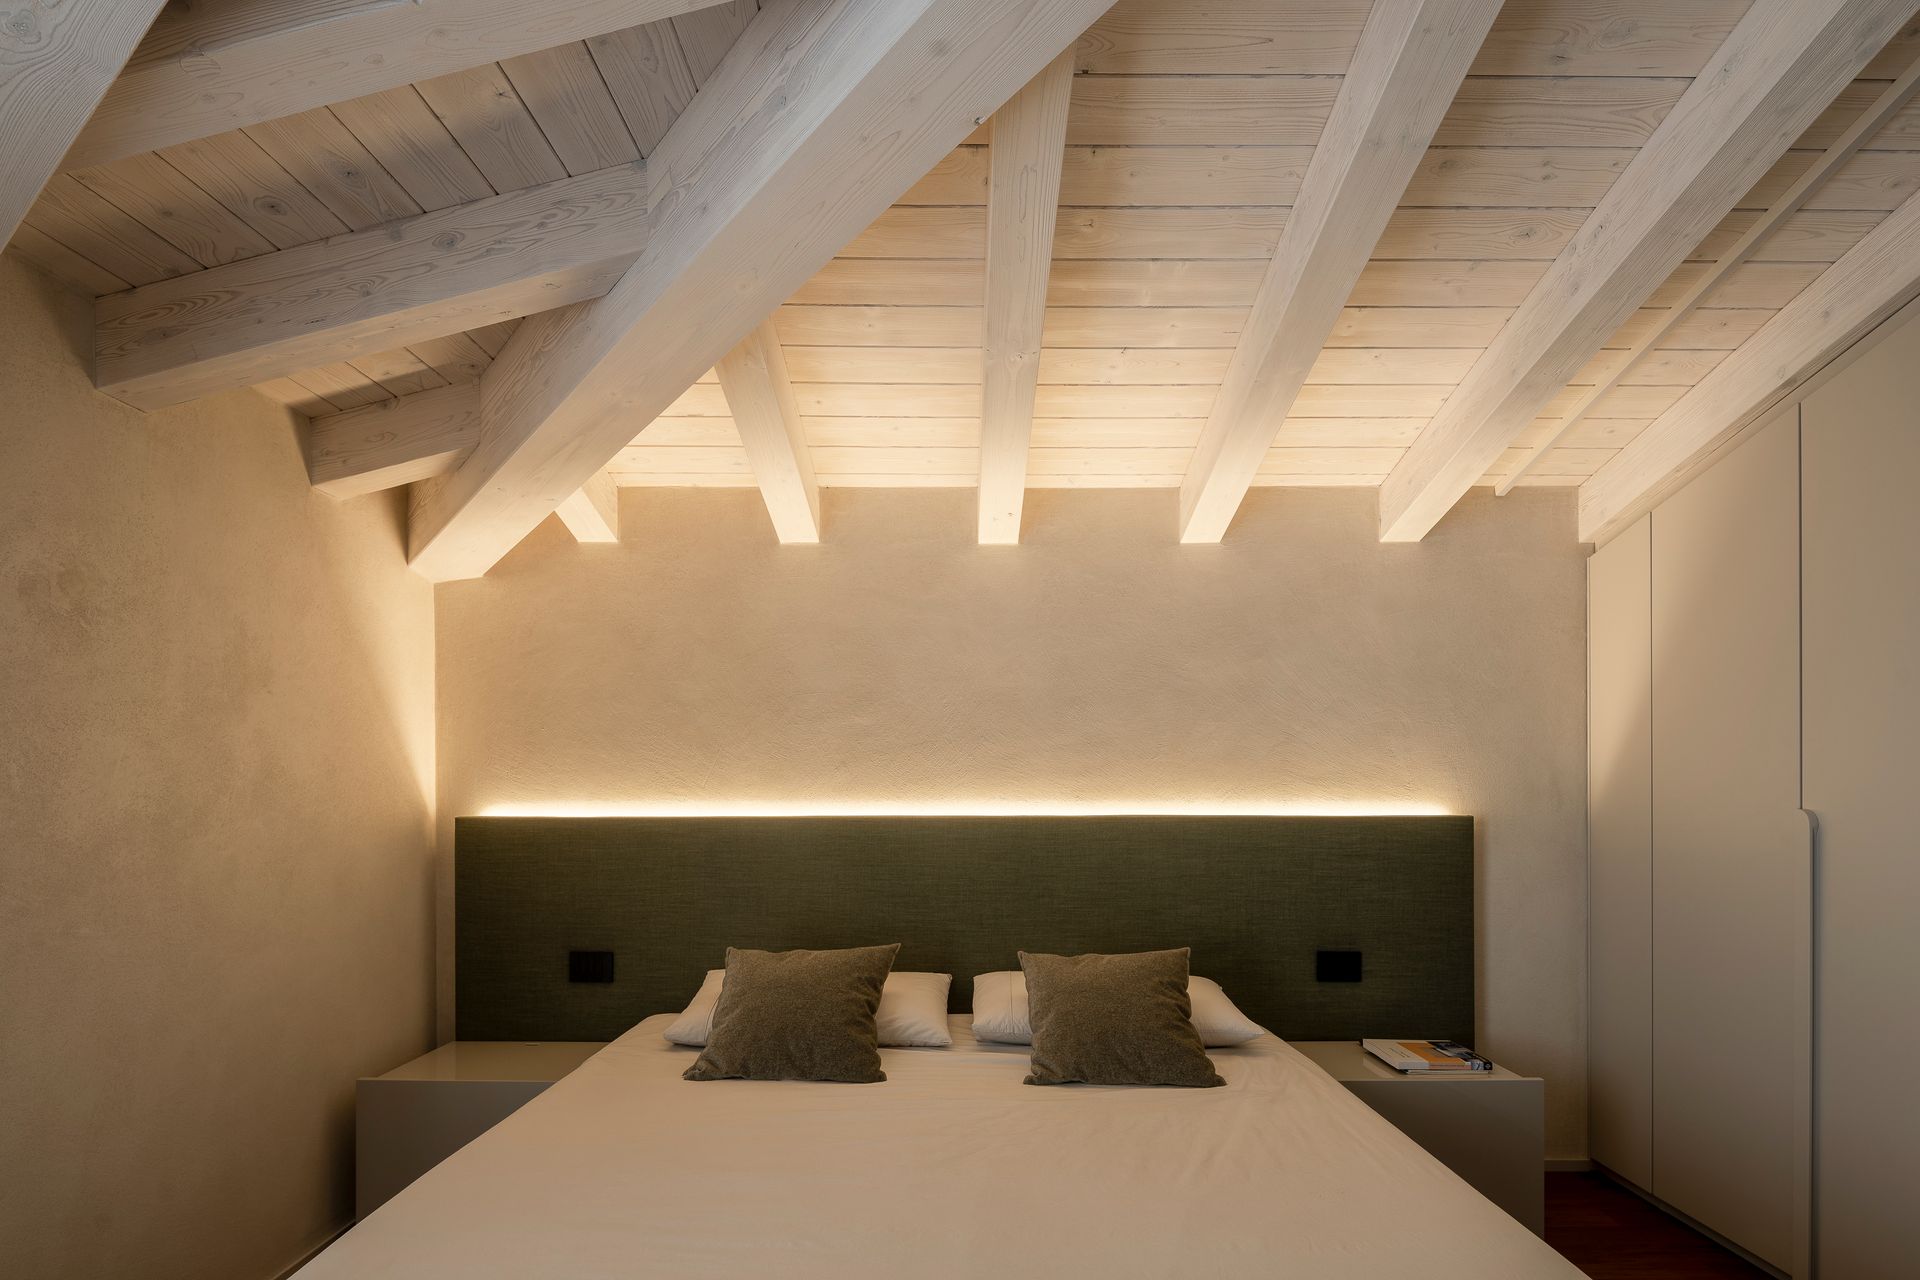 Interior design project, attic renovation with terrace with a view Bergamo, Milan, Lake Como, London, New York, Paris, Gstaad. Officina Magisafi architecture design - bedroom lighting